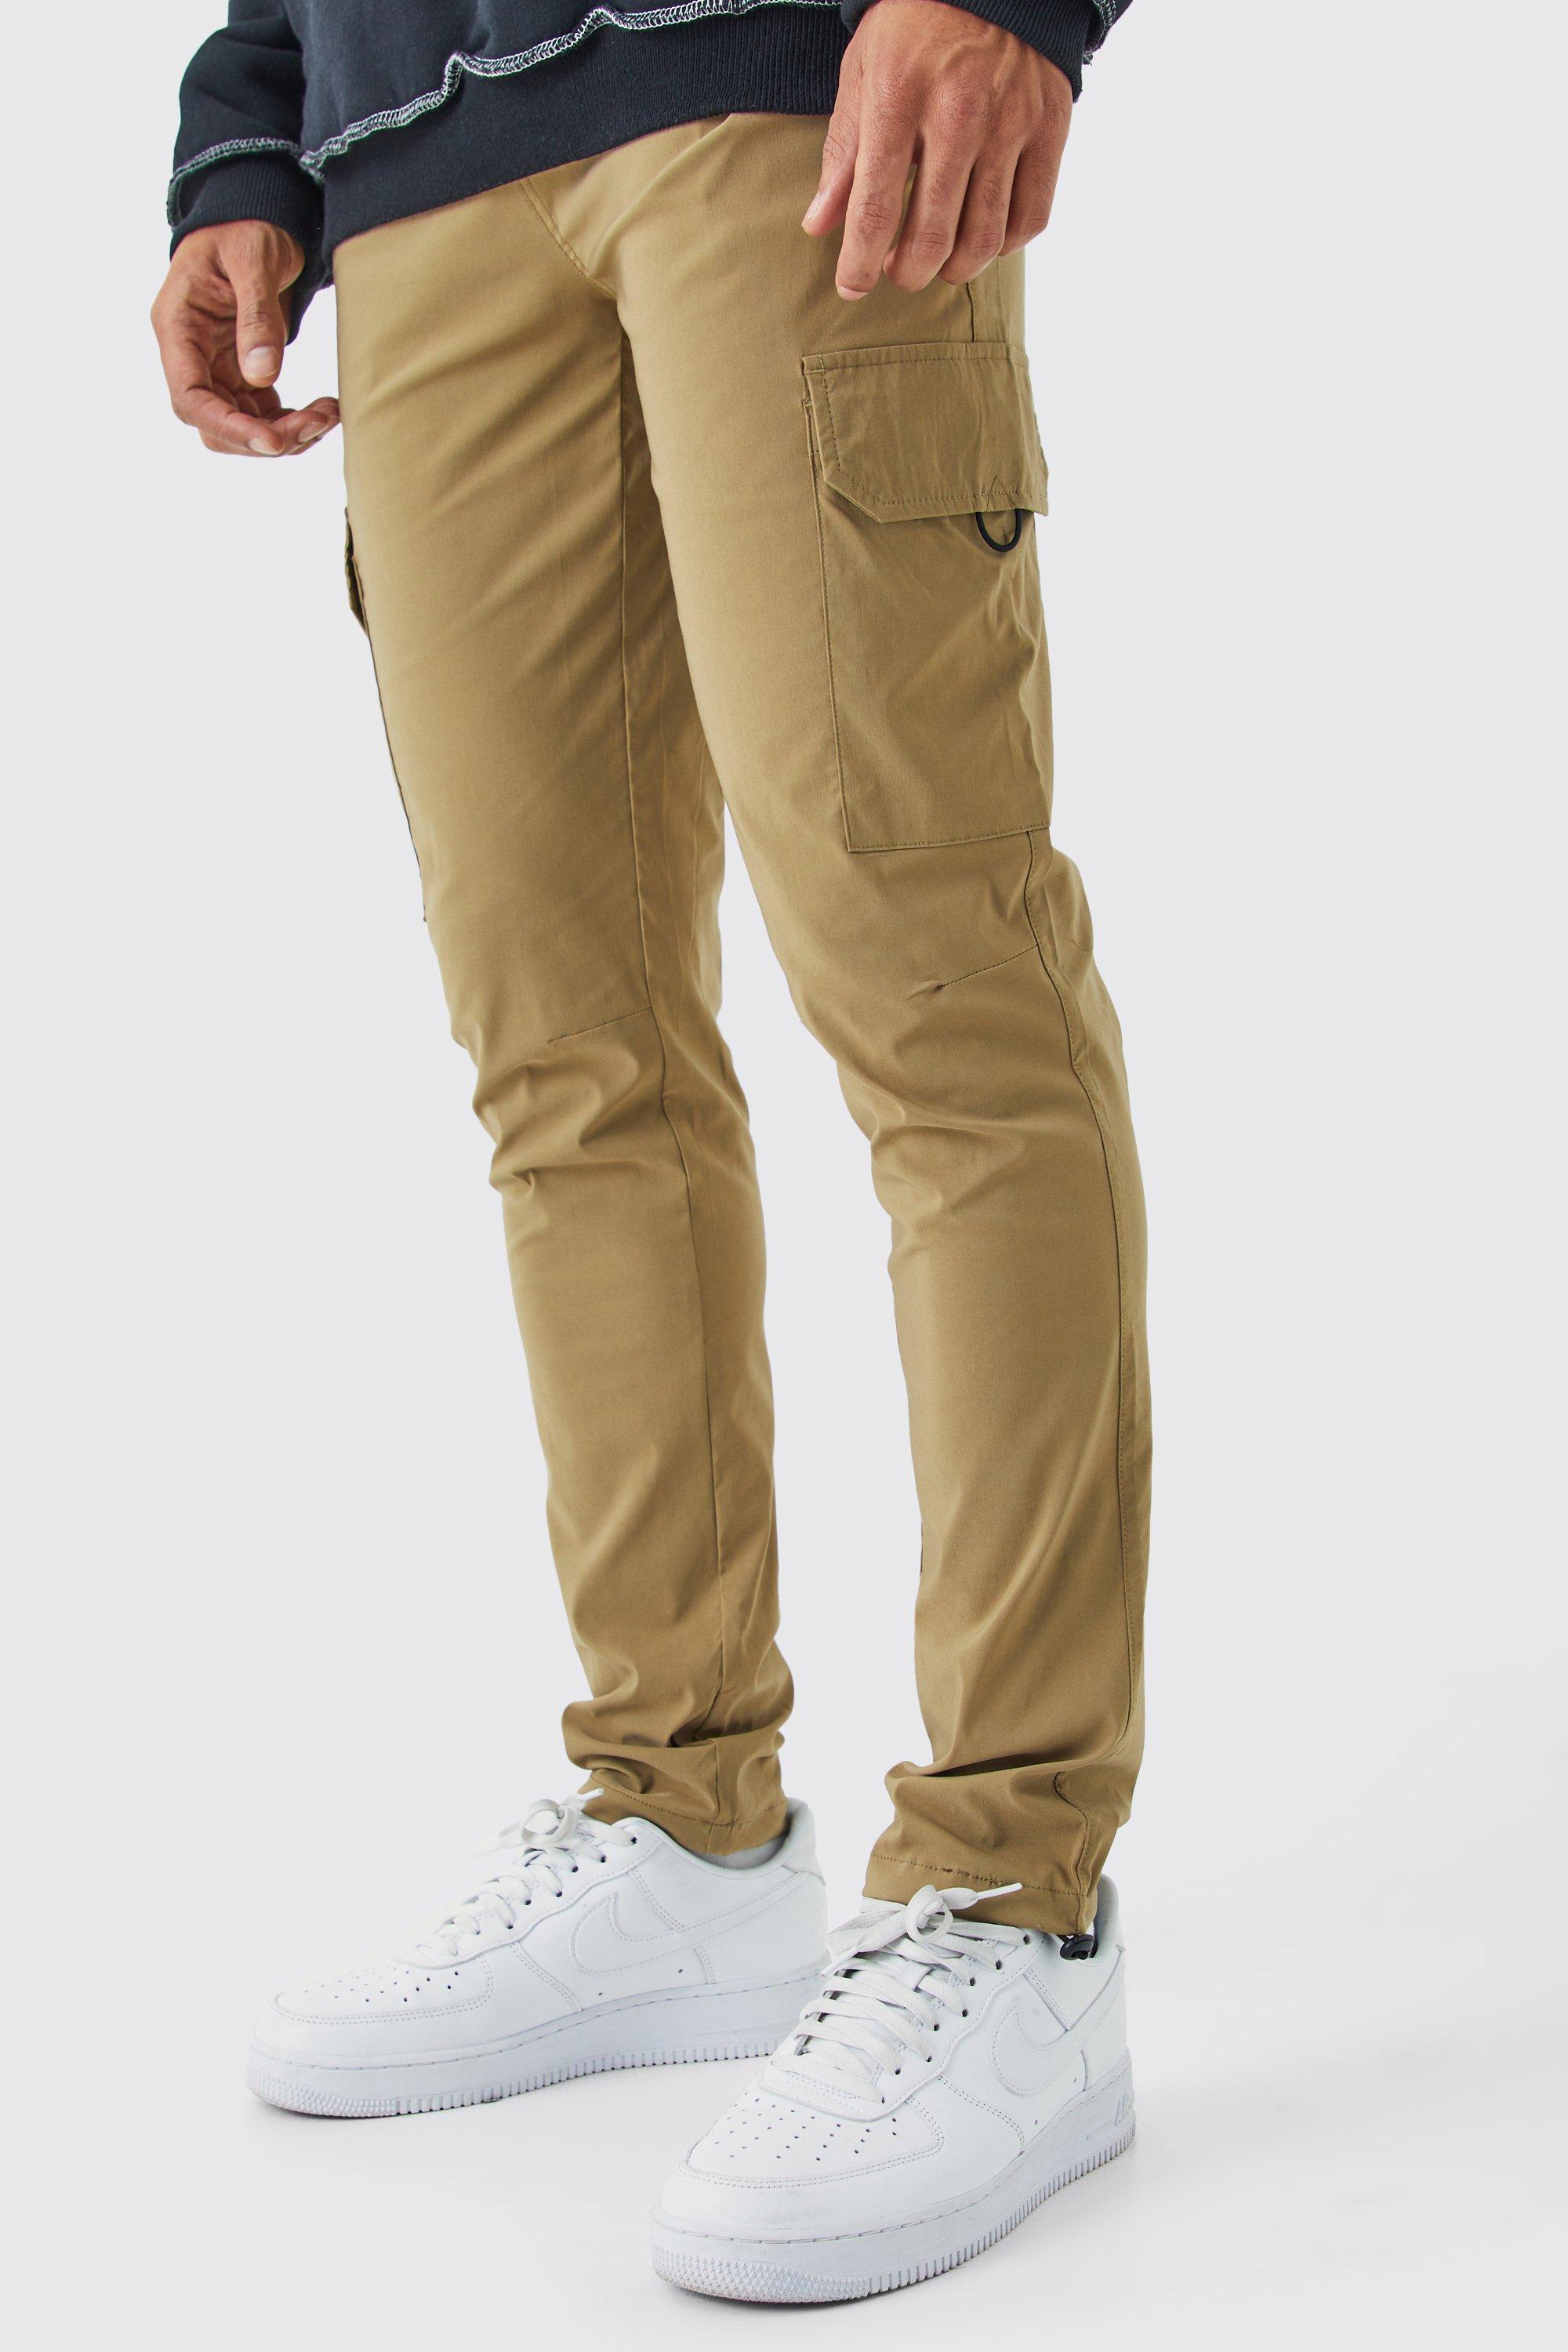 Mens Stretch Trousers, Mens Stretch Chinos